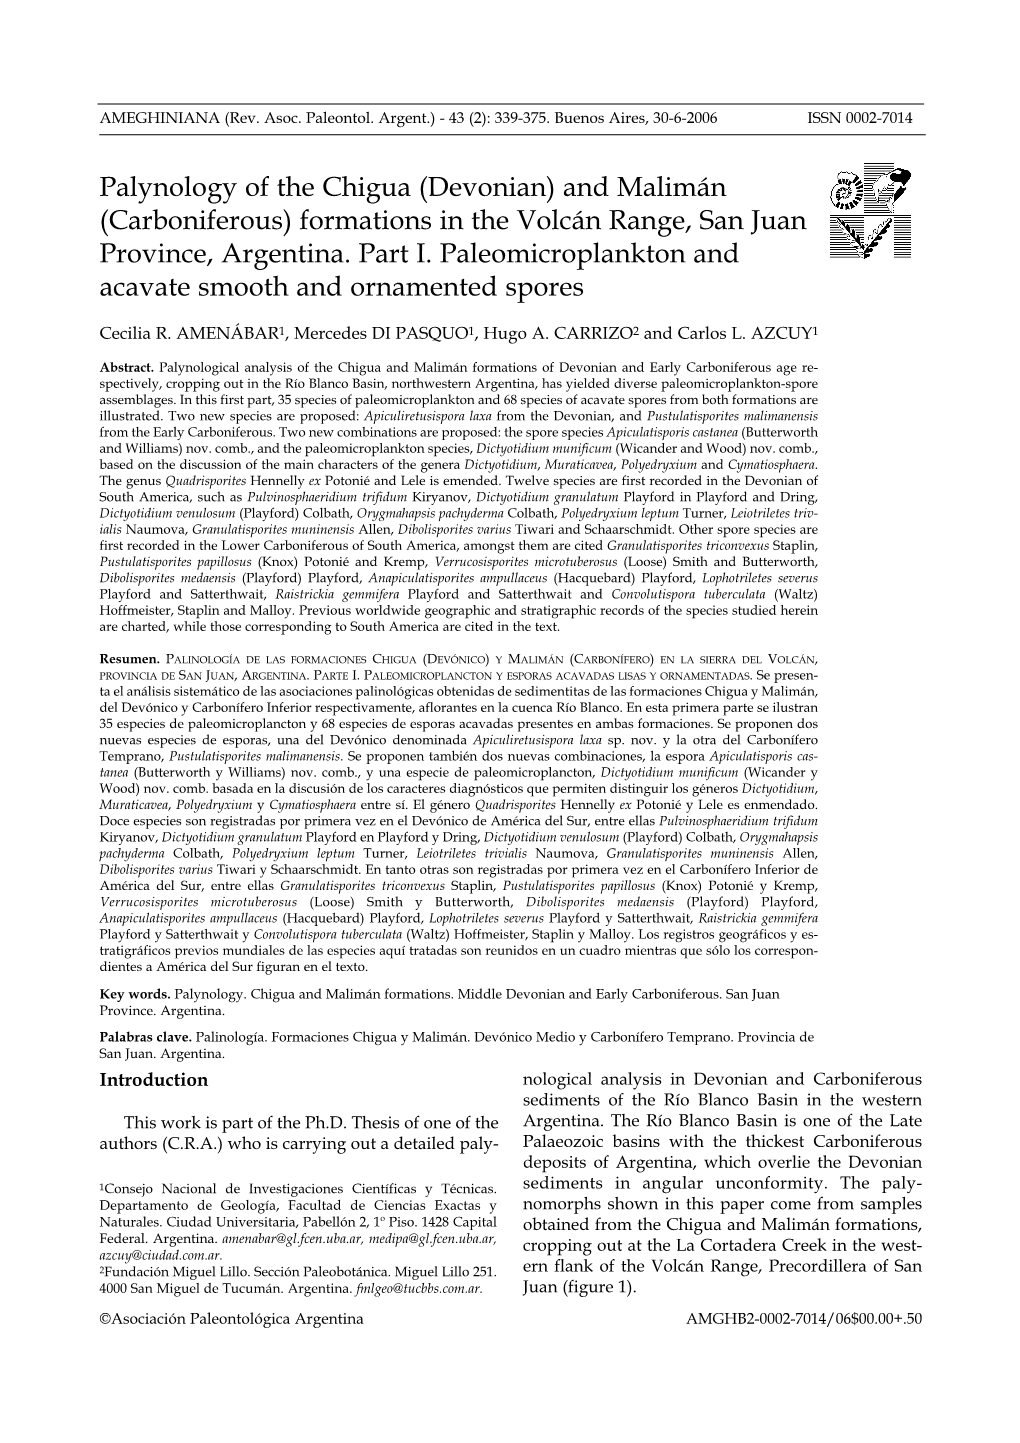 Palynology of the Chigua (Devonian) and Malimán (Carboniferous) Formations in the Volcán Range, San Juan Province, Argentina. Part I